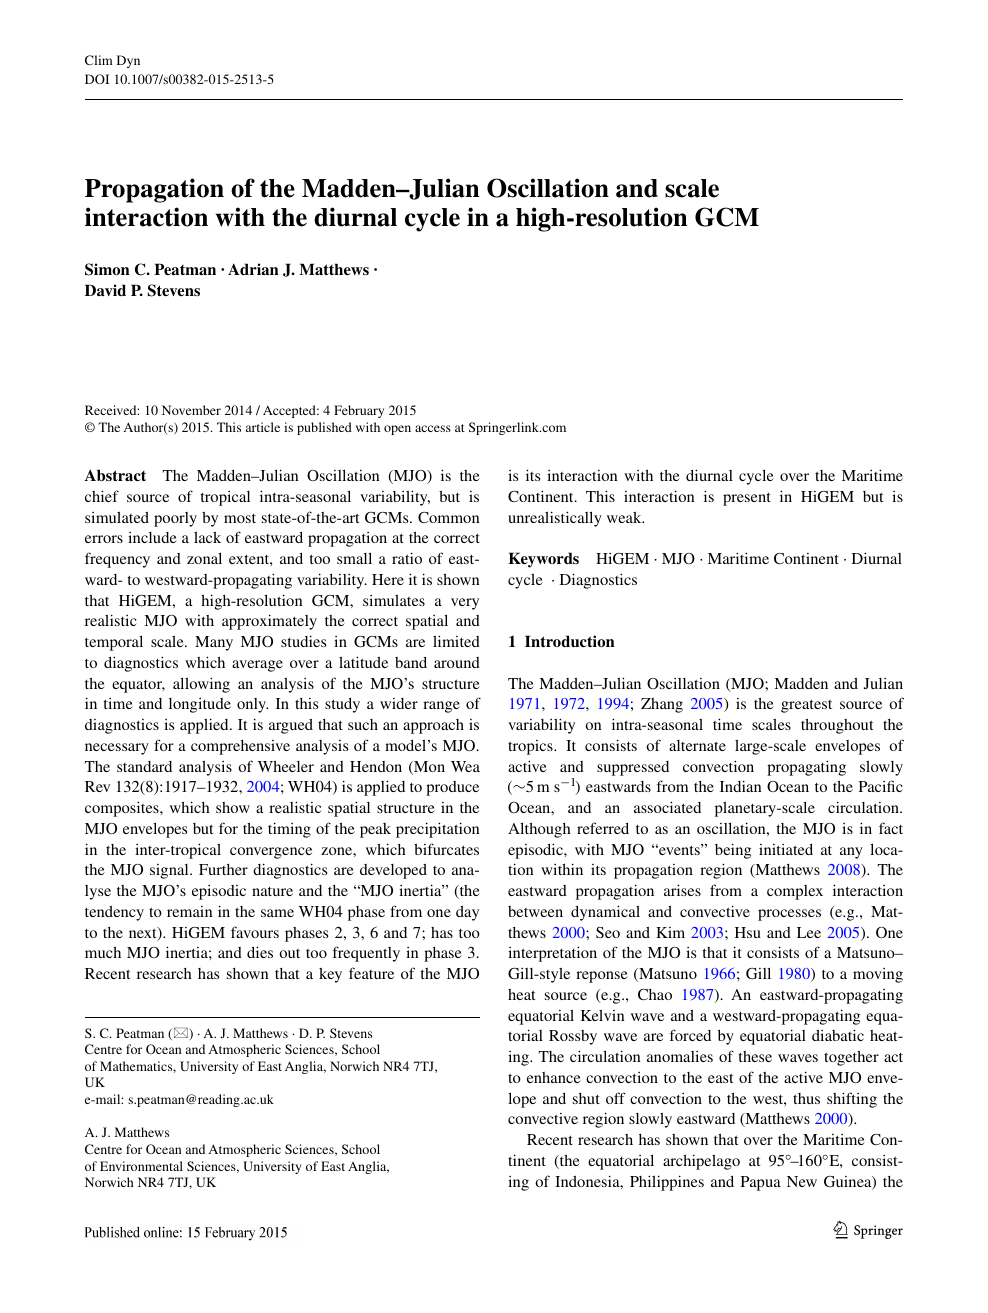 Propagation Of The Madden Julian Oscillation And Scale Interaction With The Diurnal Cycle In A High Resolution Gcm Topic Of Research Paper In Earth And Related Environmental Sciences Download Scholarly Article Pdf And